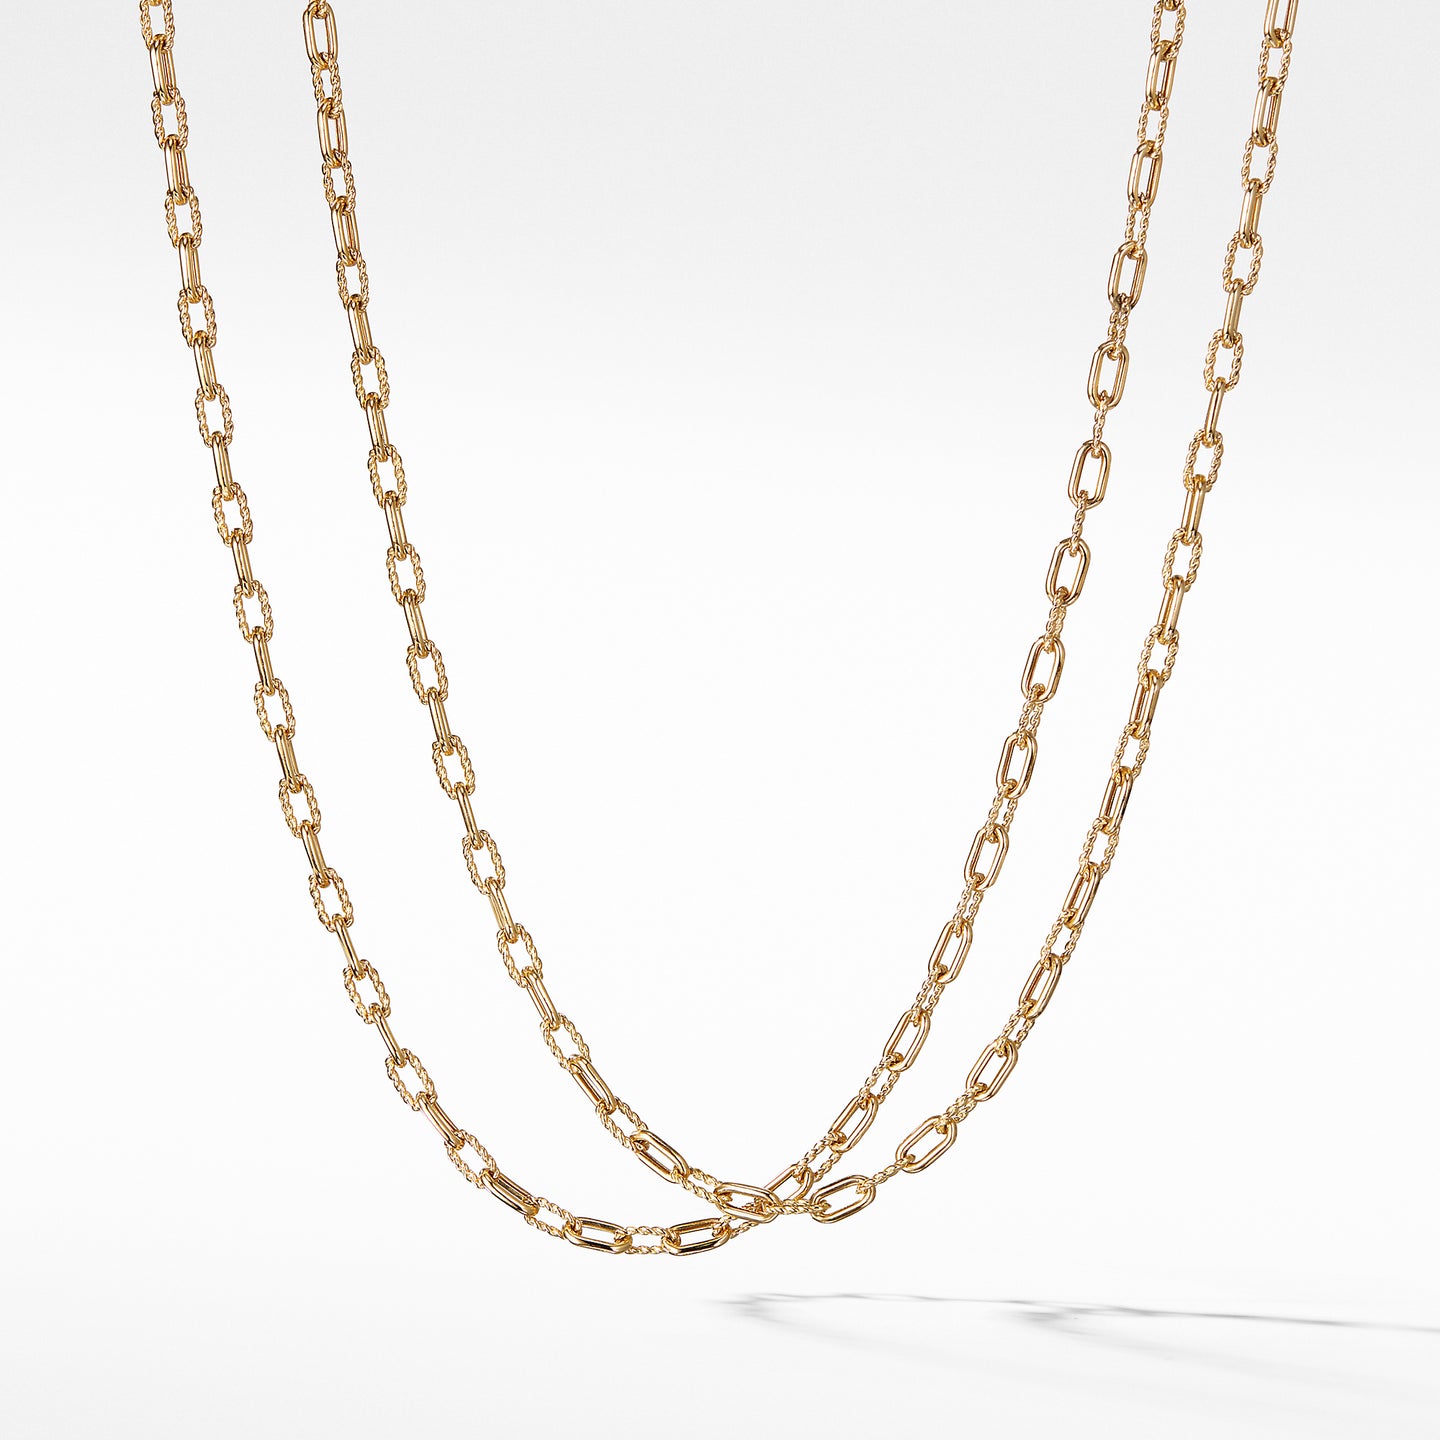 David Yurman The Throroughbred® Collection  Necklaces & Pendant in 18-Karat Yellow Gold